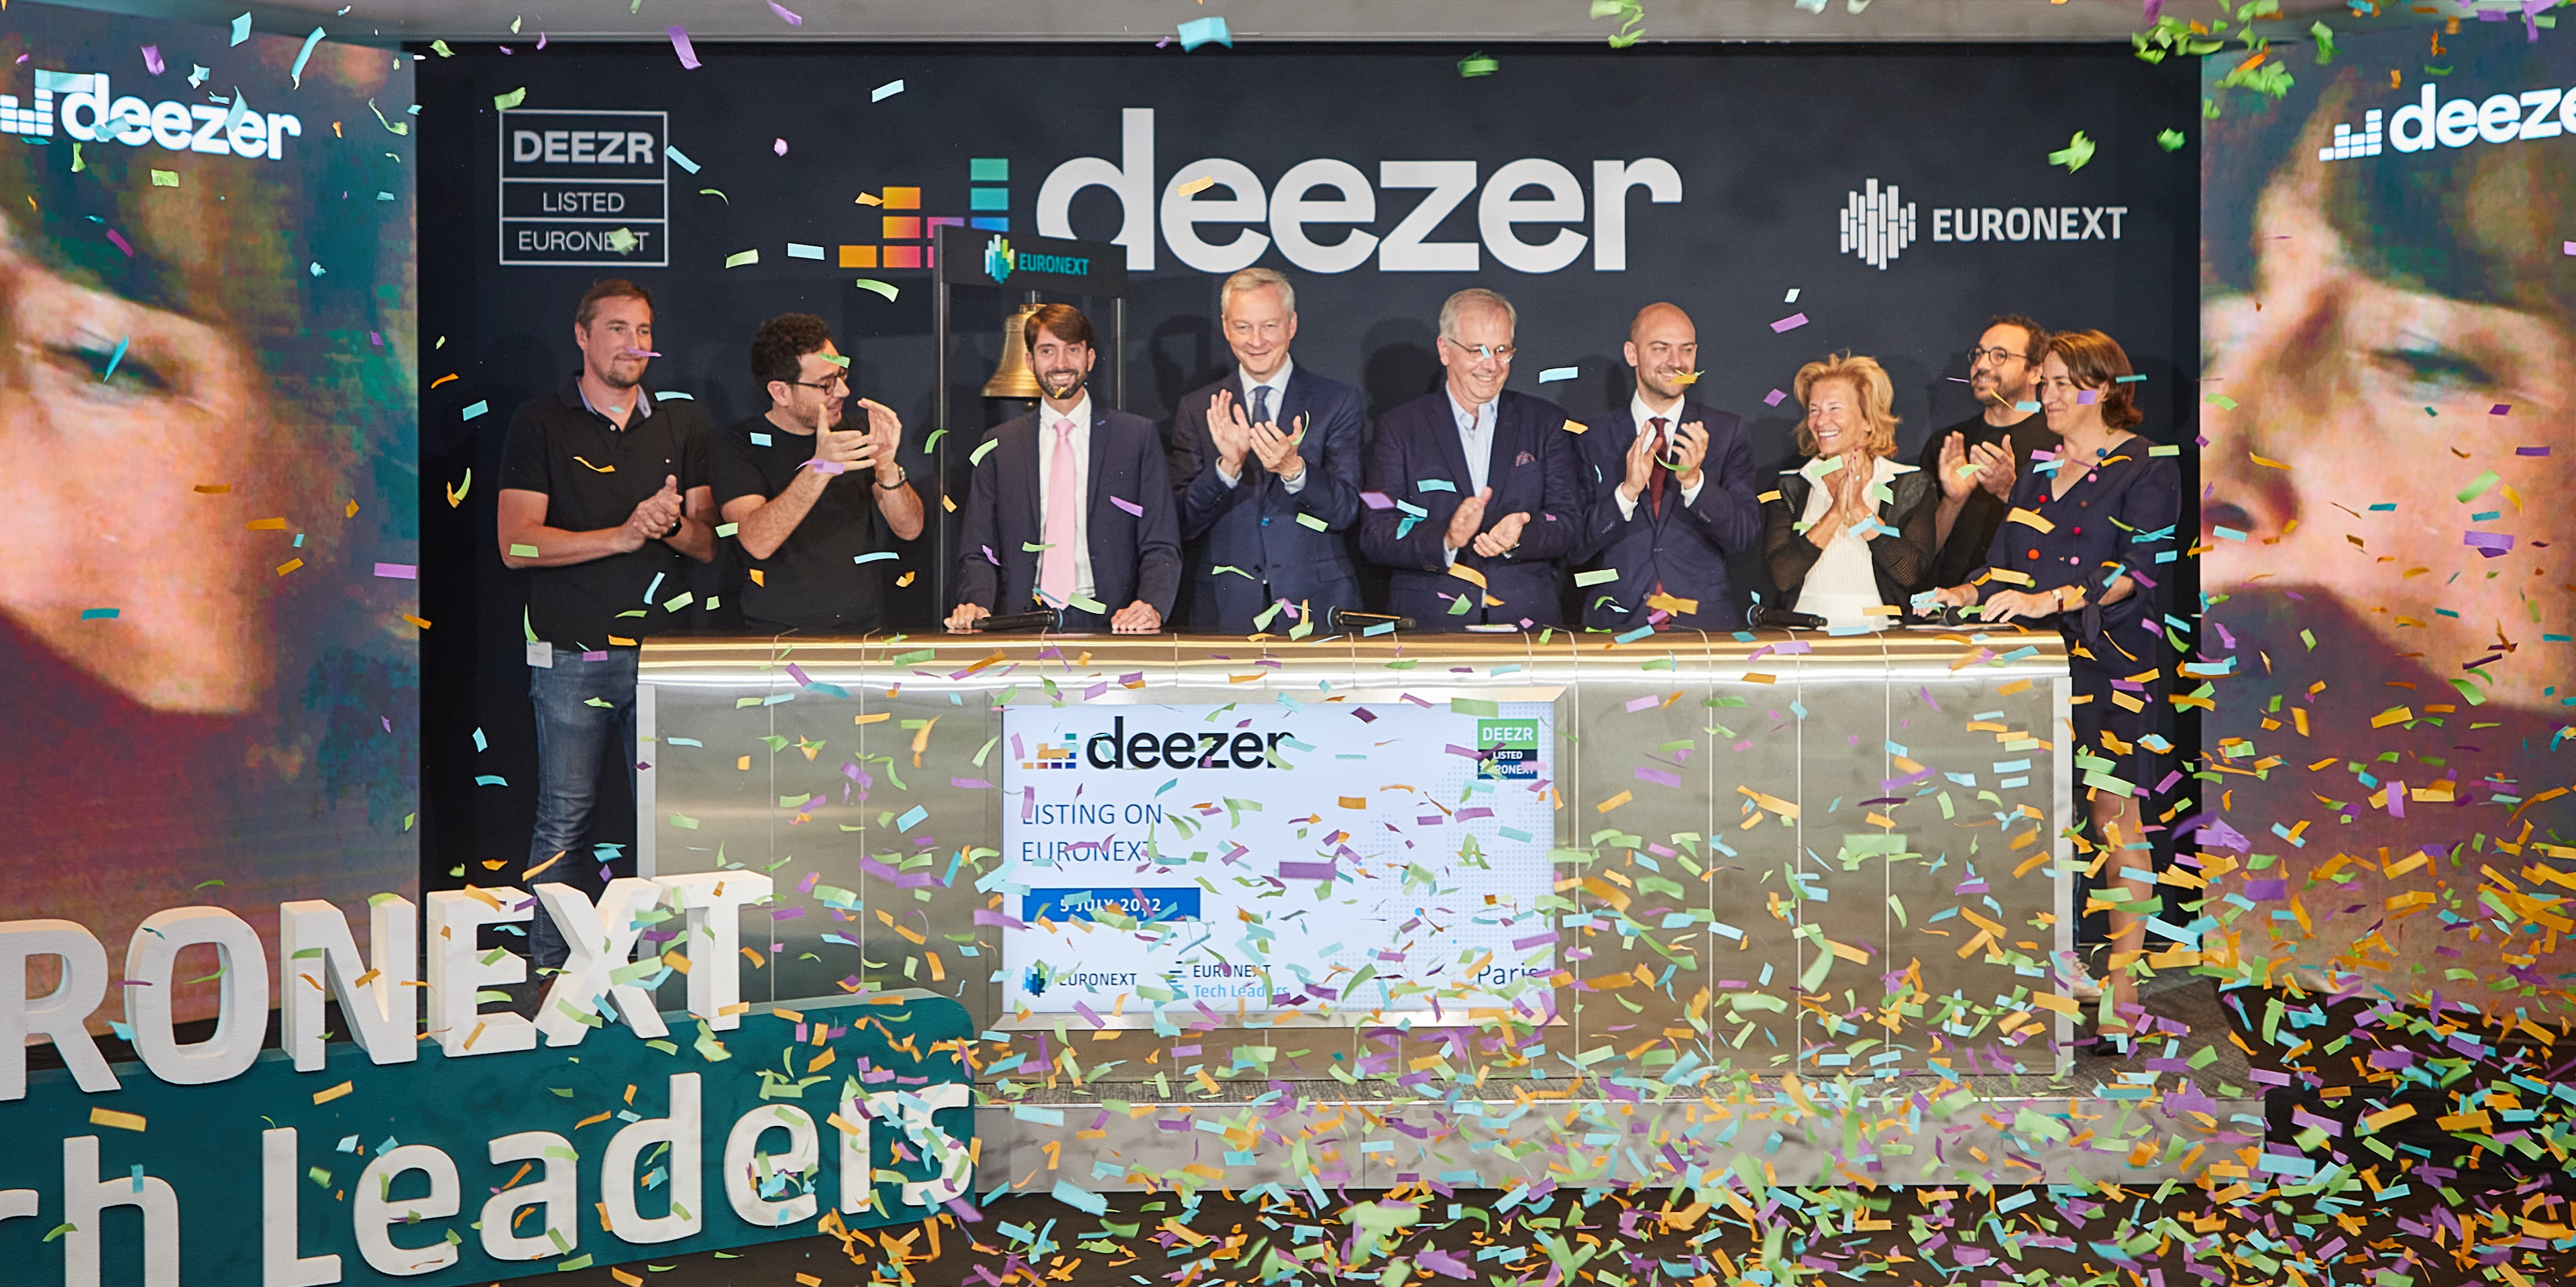 Deezer CEO Jeronimo Folgueira and France Economy Minister Bruno Le Maire.